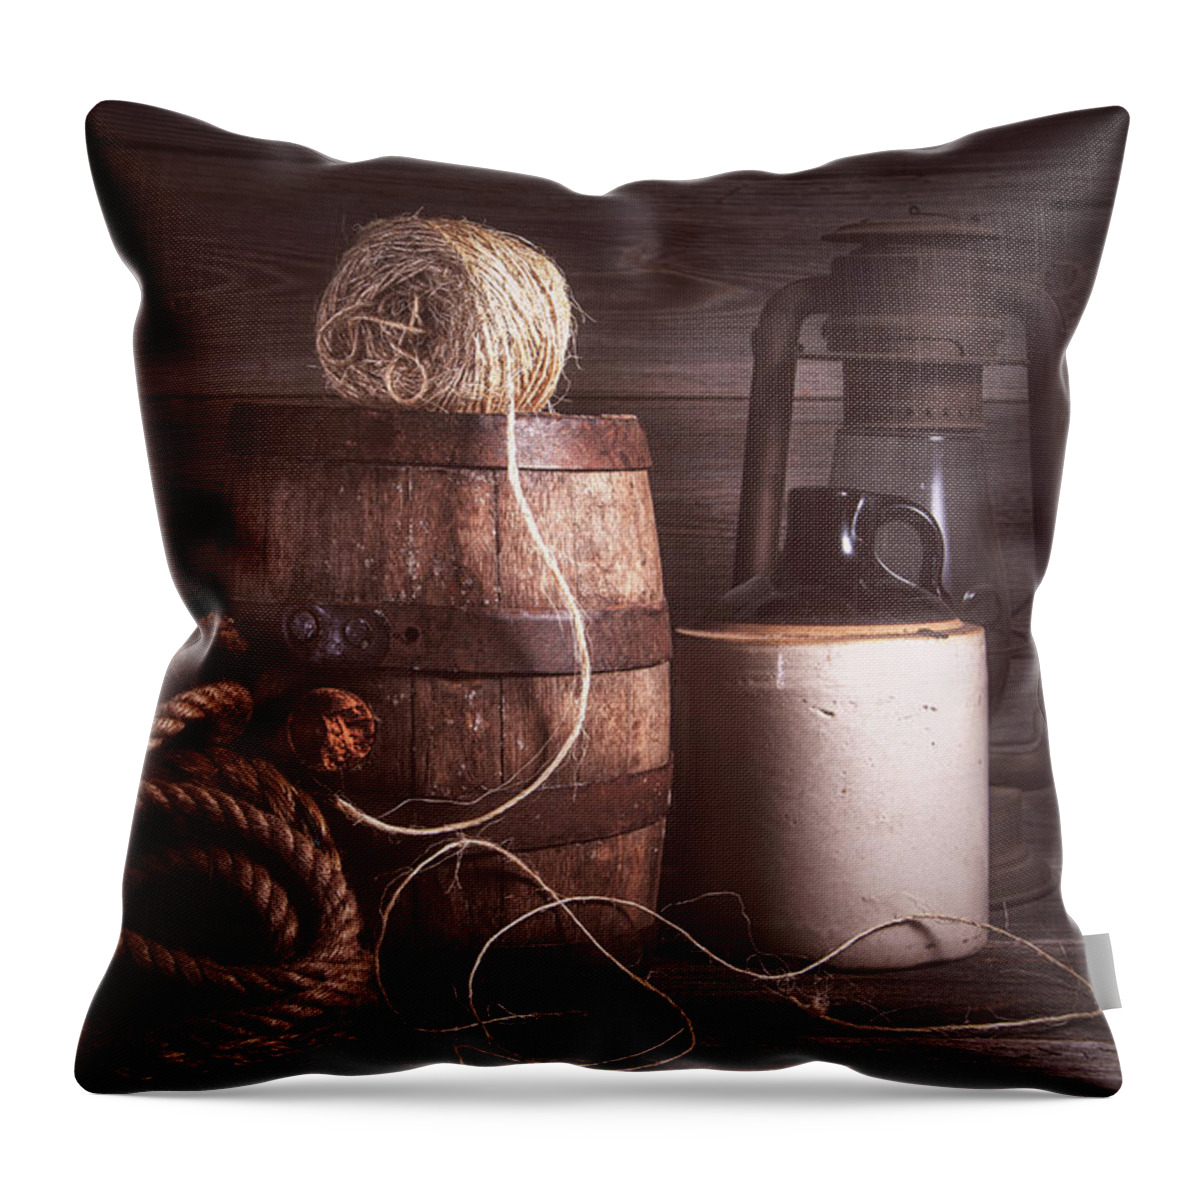 Twine Throw Pillow featuring the photograph Rustic Still Life with Twine by Tom Mc Nemar